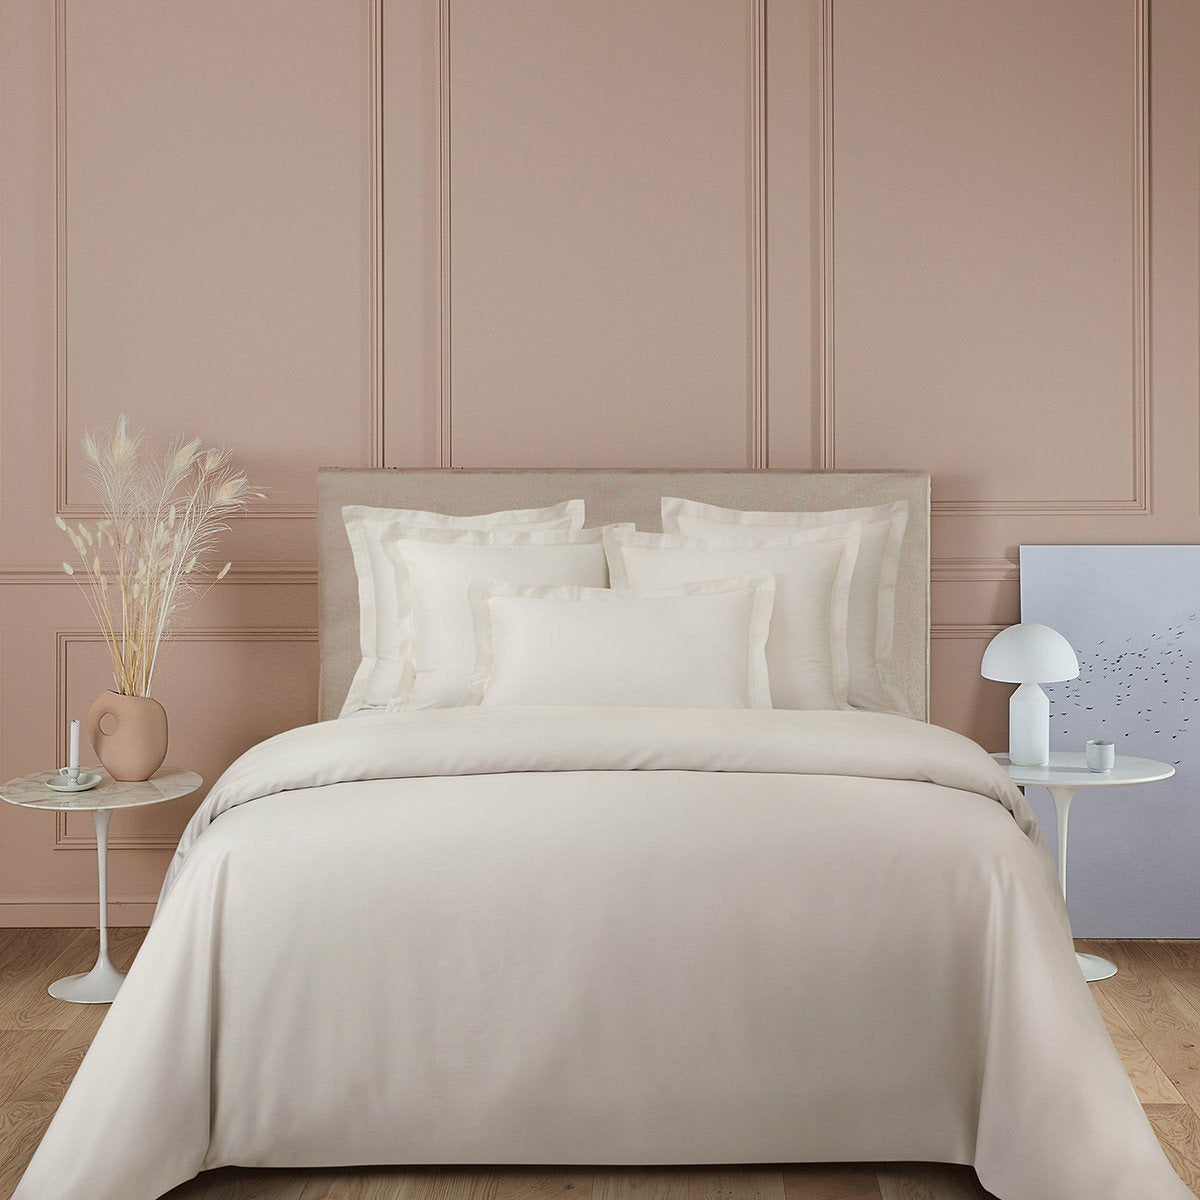 Yves Delorme Triomphe Bedding Lifestyle Front Nacre Fine Linens